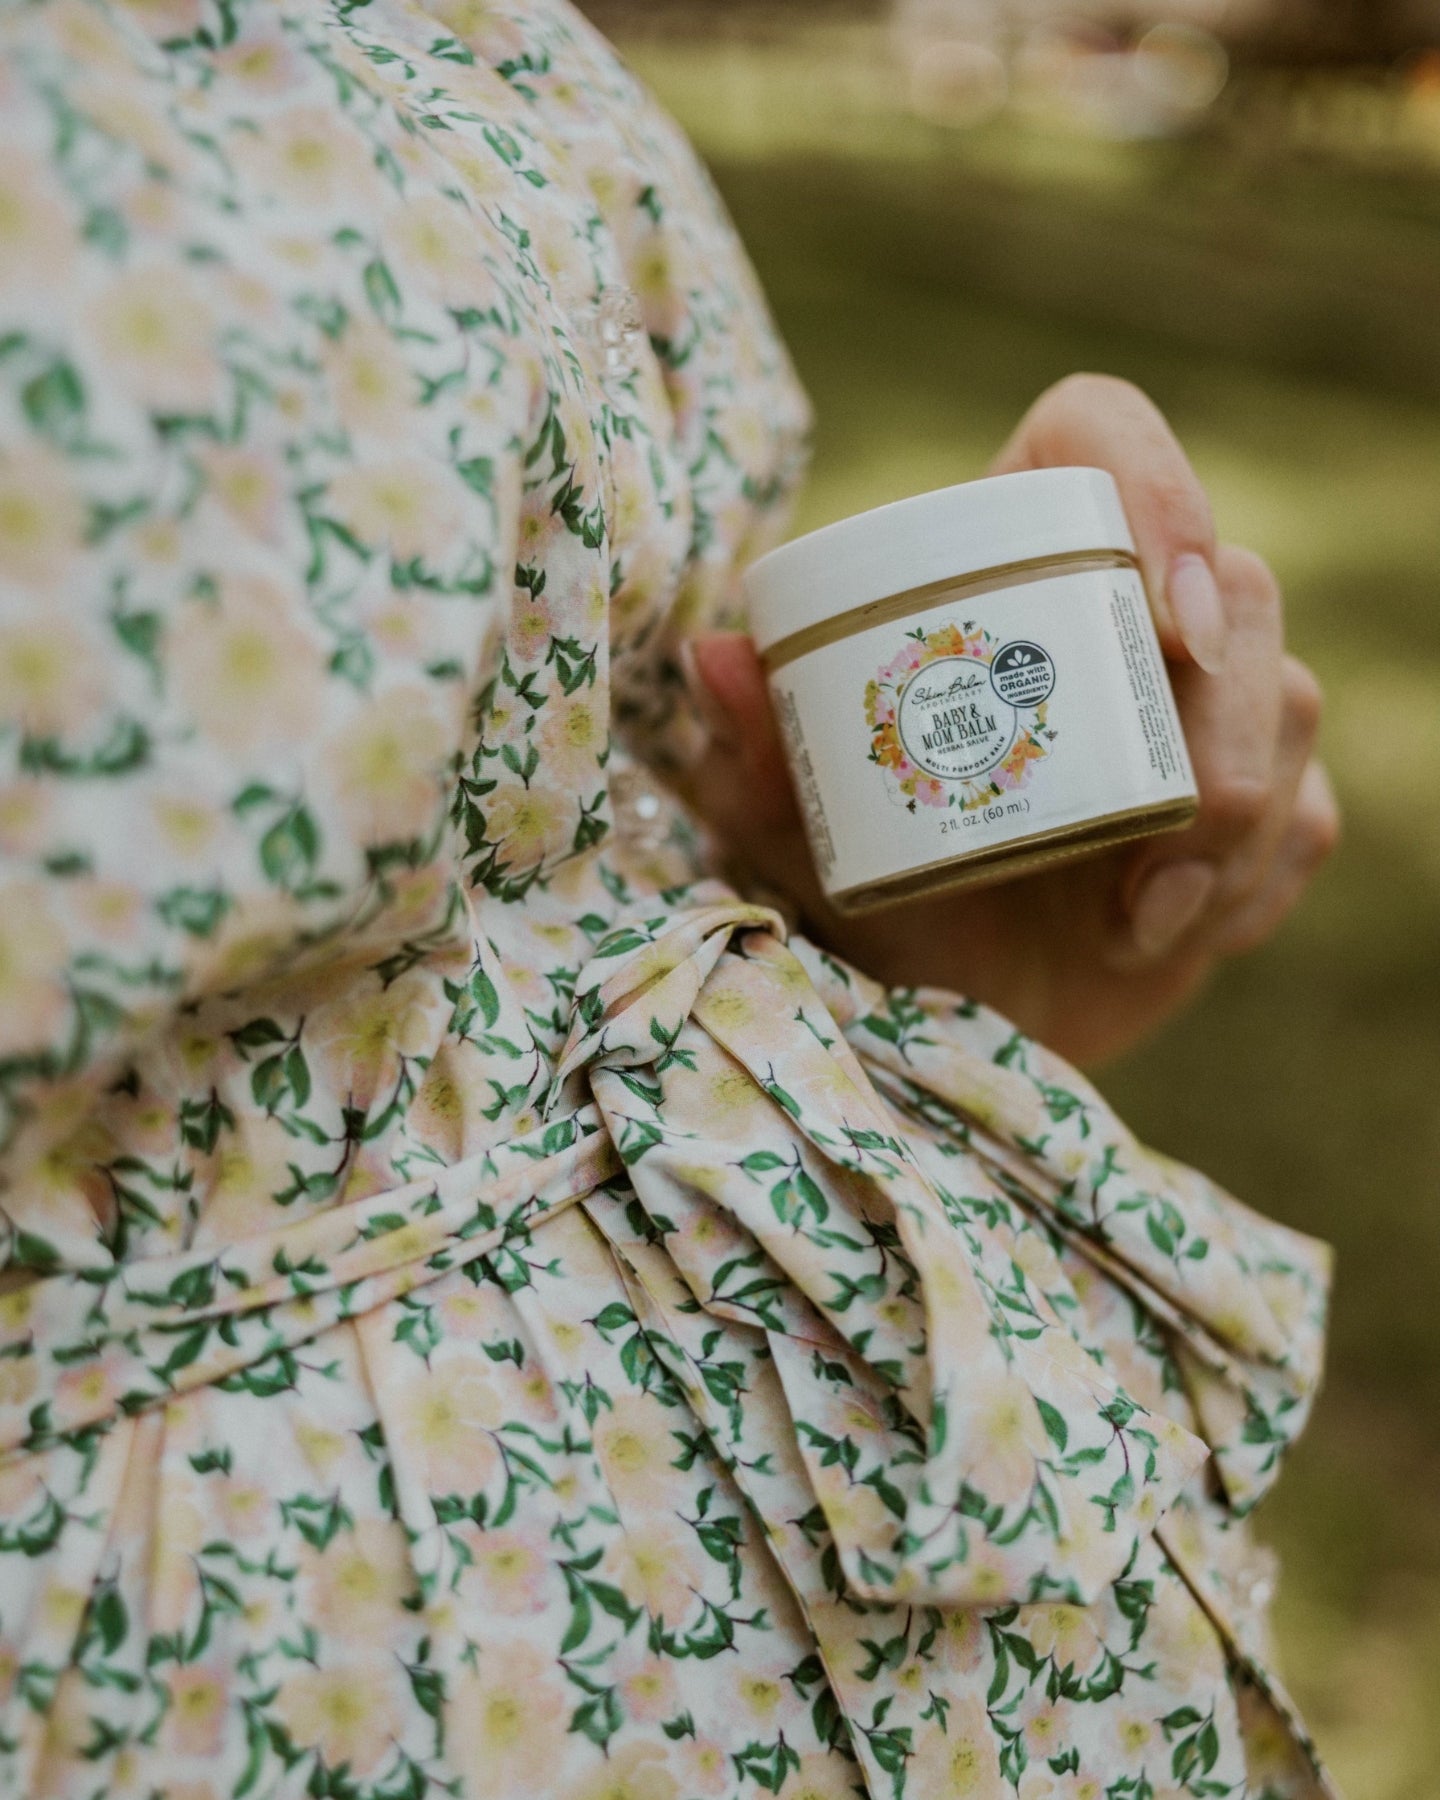 A close-up shot of a pregnant woman in a yellow and green floral print dress holding the Baby & Mom Balm against her bump.